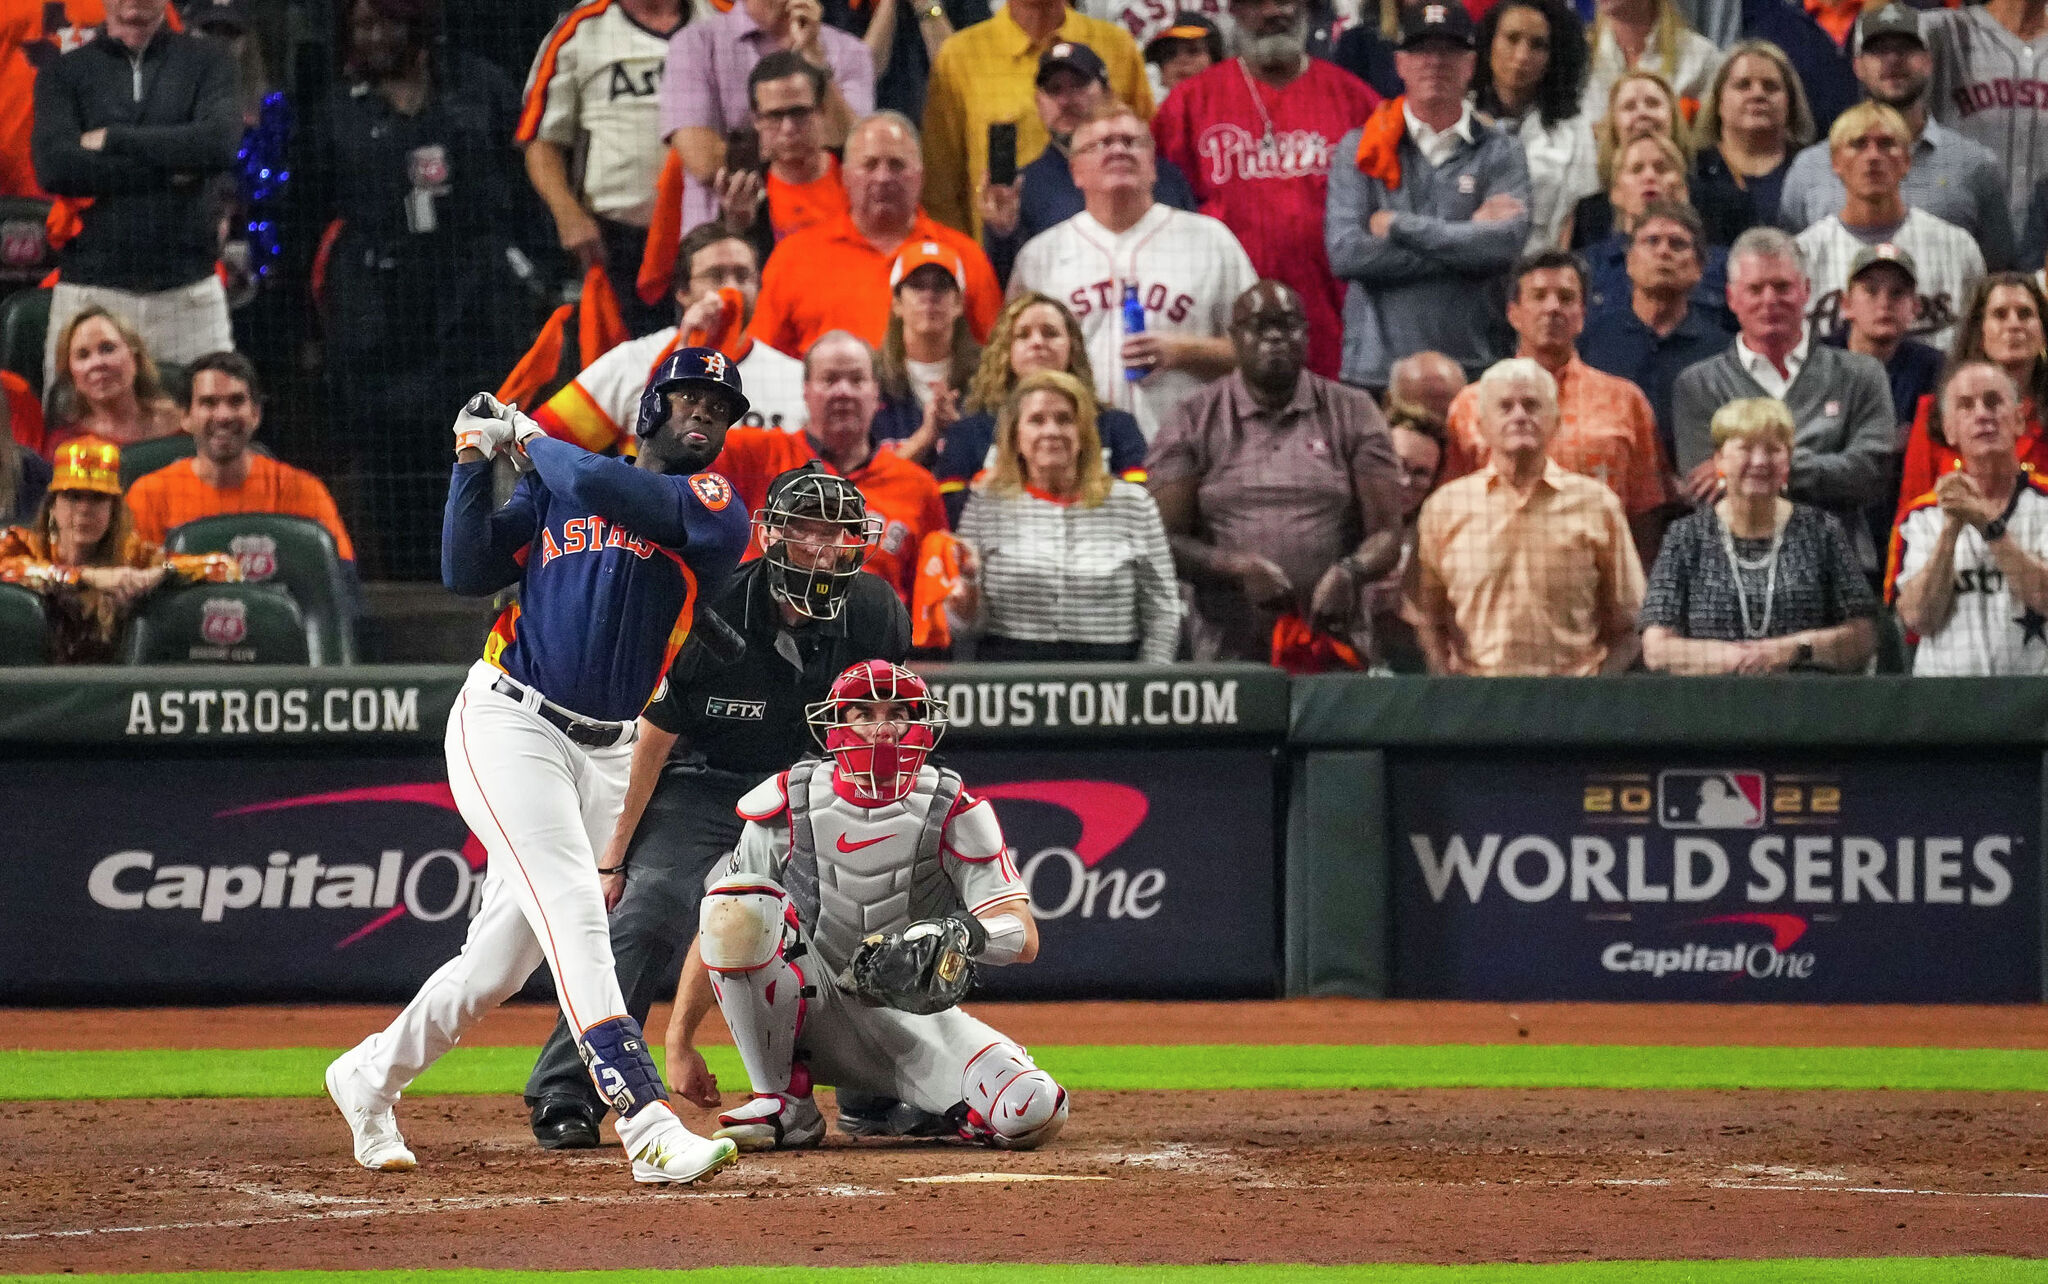 World Series 2022 tickets for Astros vs Phillies games: Where to buy